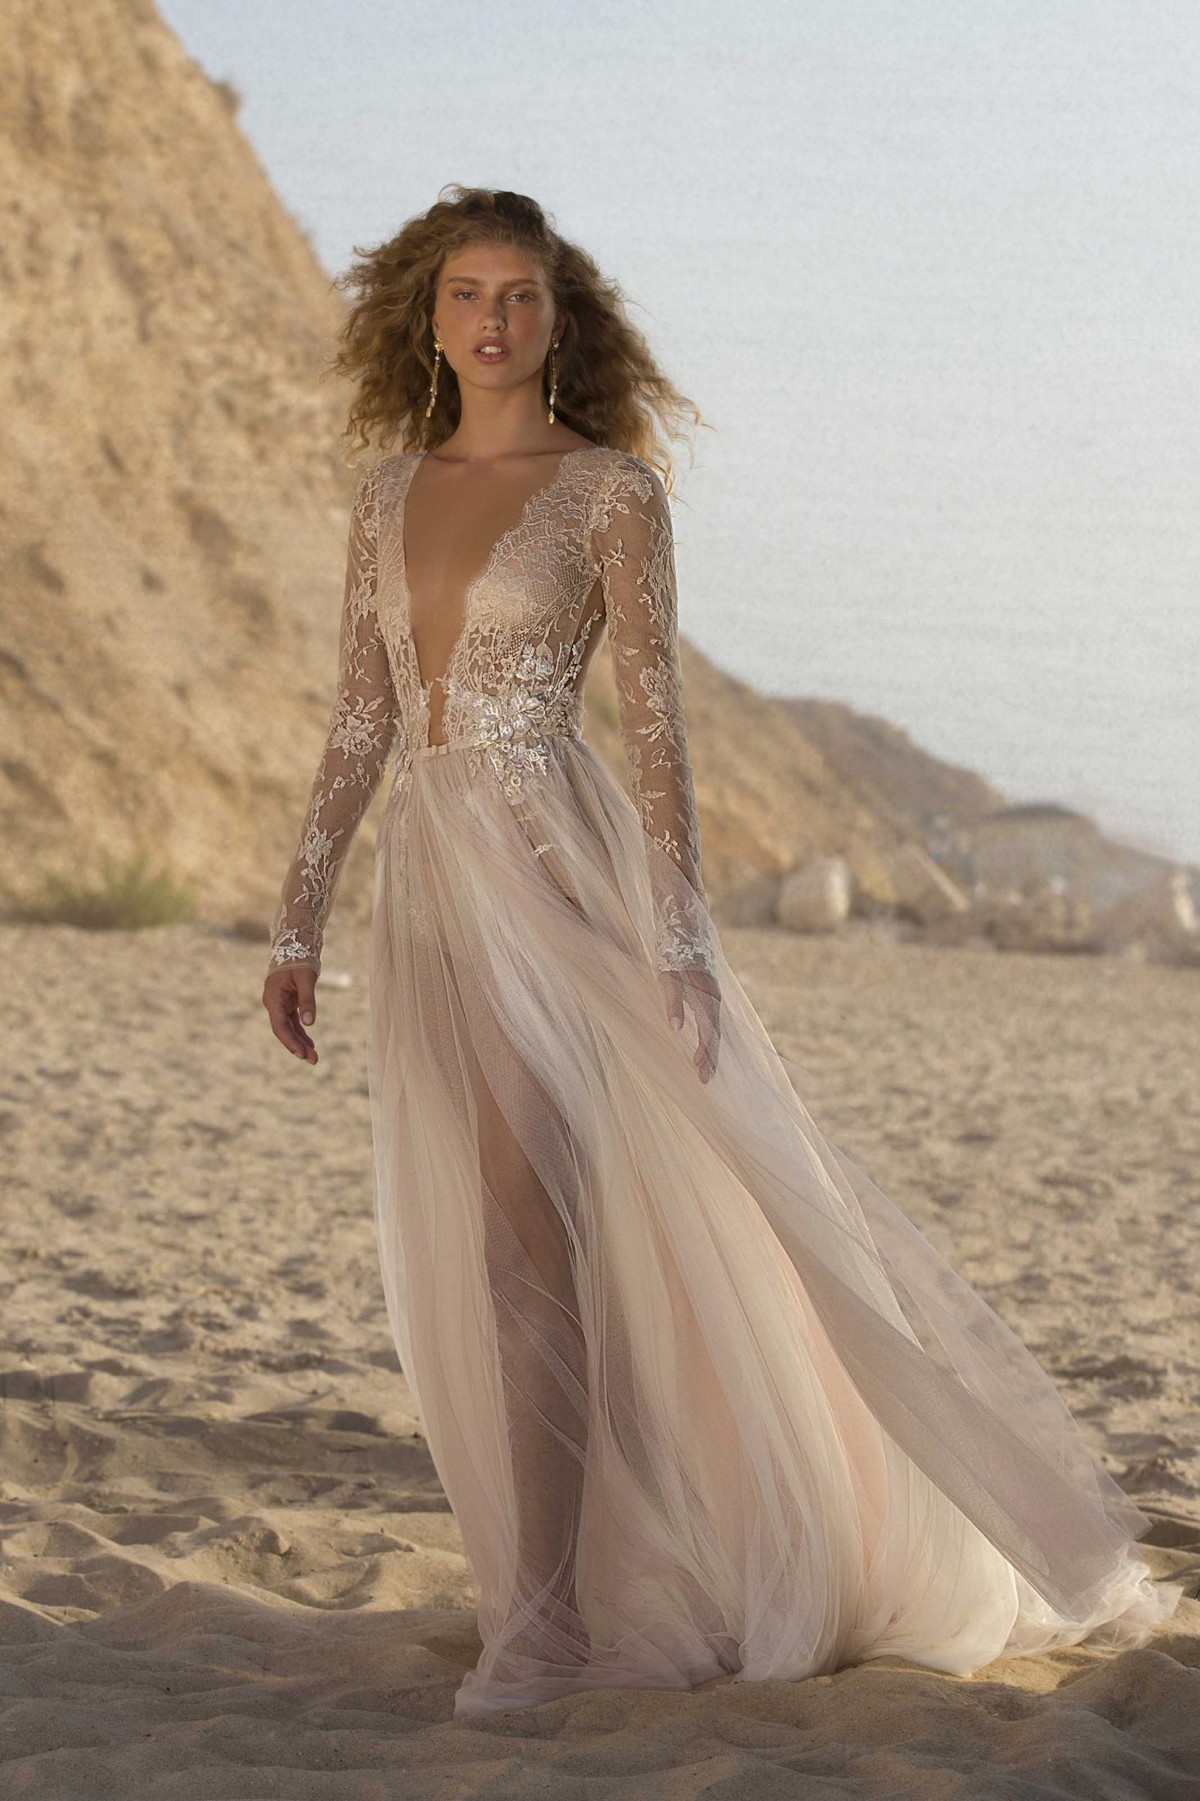 21-HEIDI Bridal Dress Inspirated By Berta Muse 2021 Vista Mare Collection